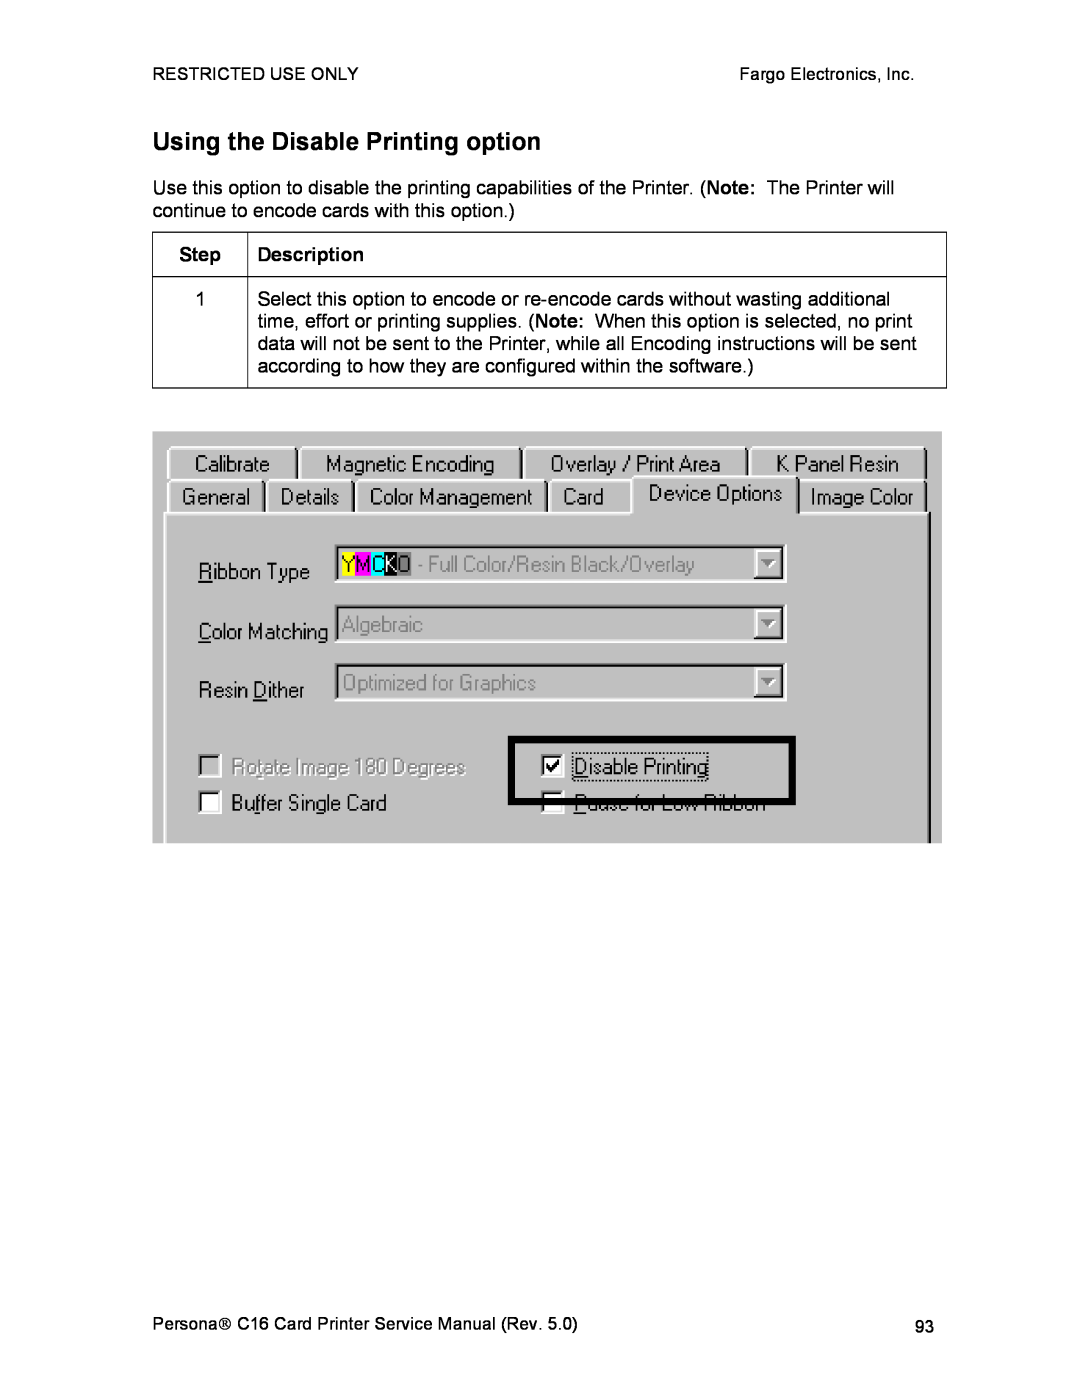 FARGO electronic C16 service manual Using the Disable Printing option 